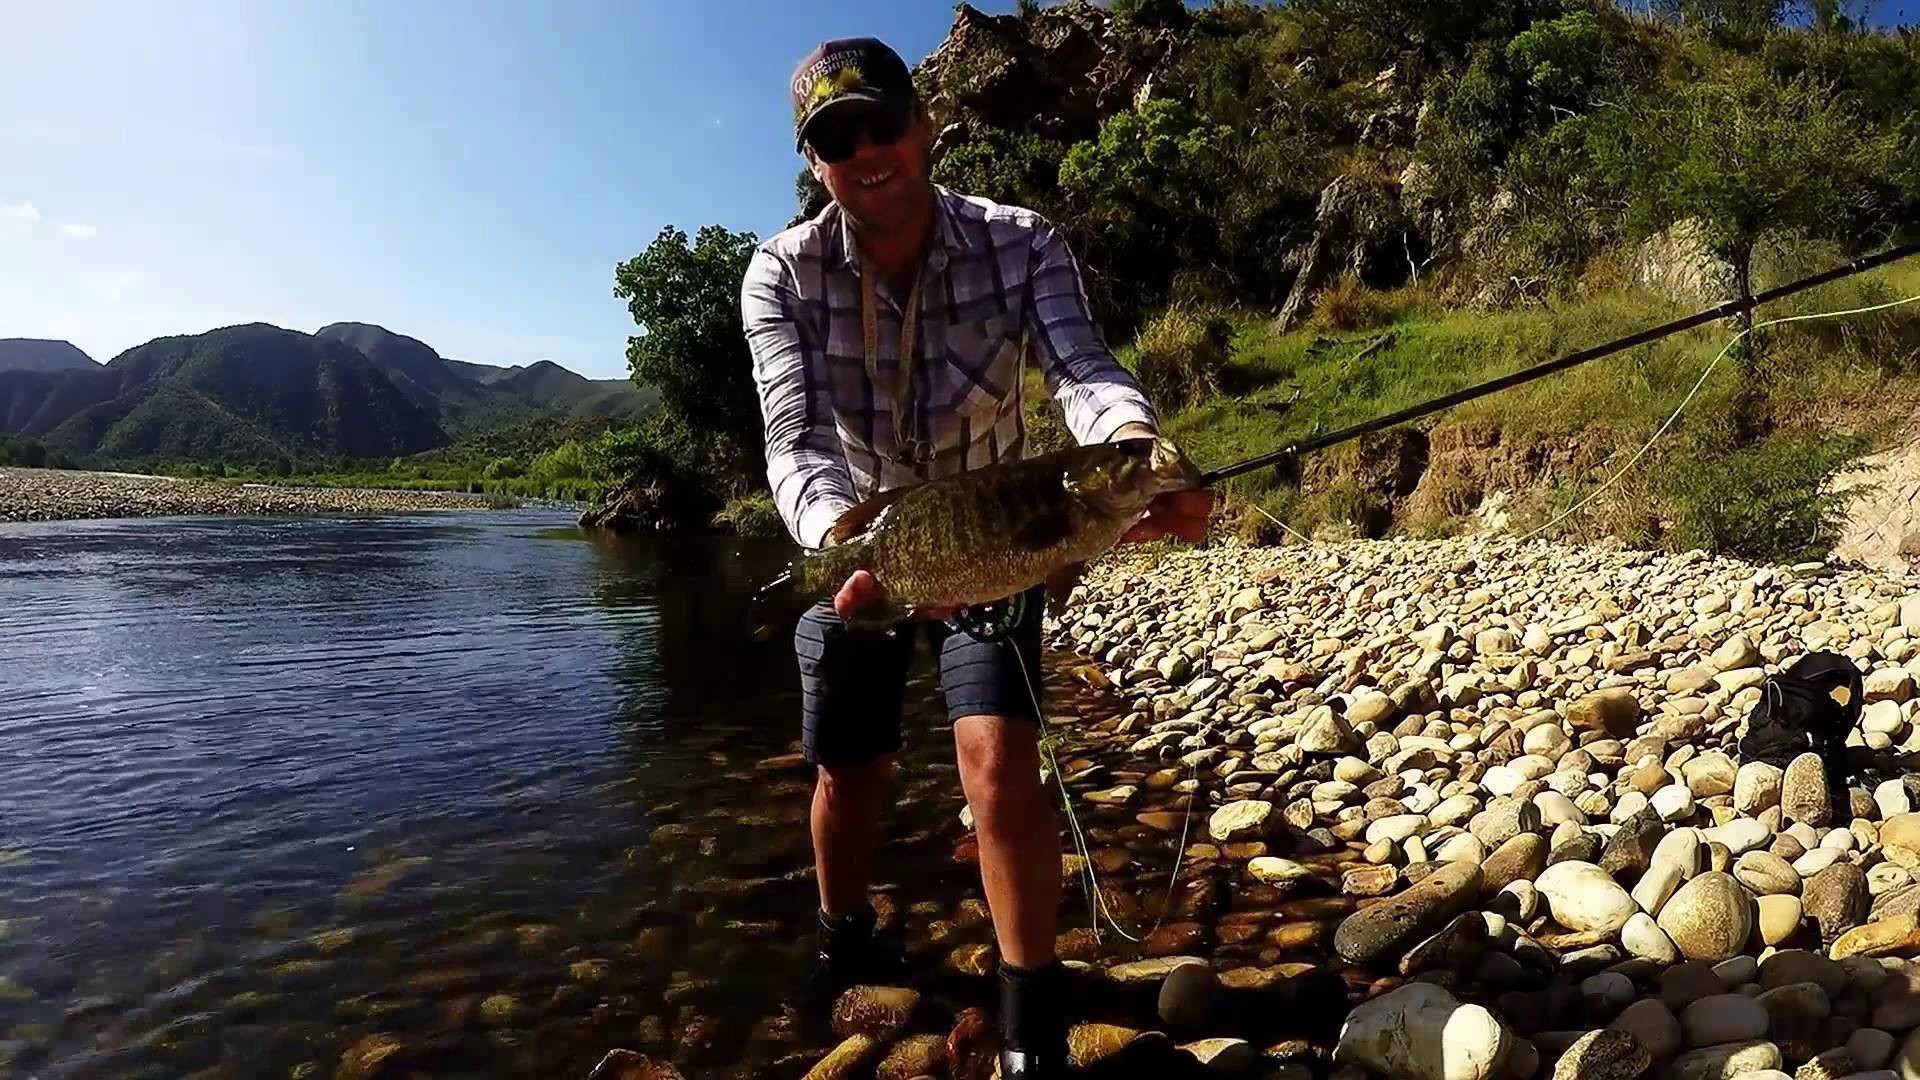 1920x1080 Fly-fishing for Smallmouth bass in the Baviaanskloof